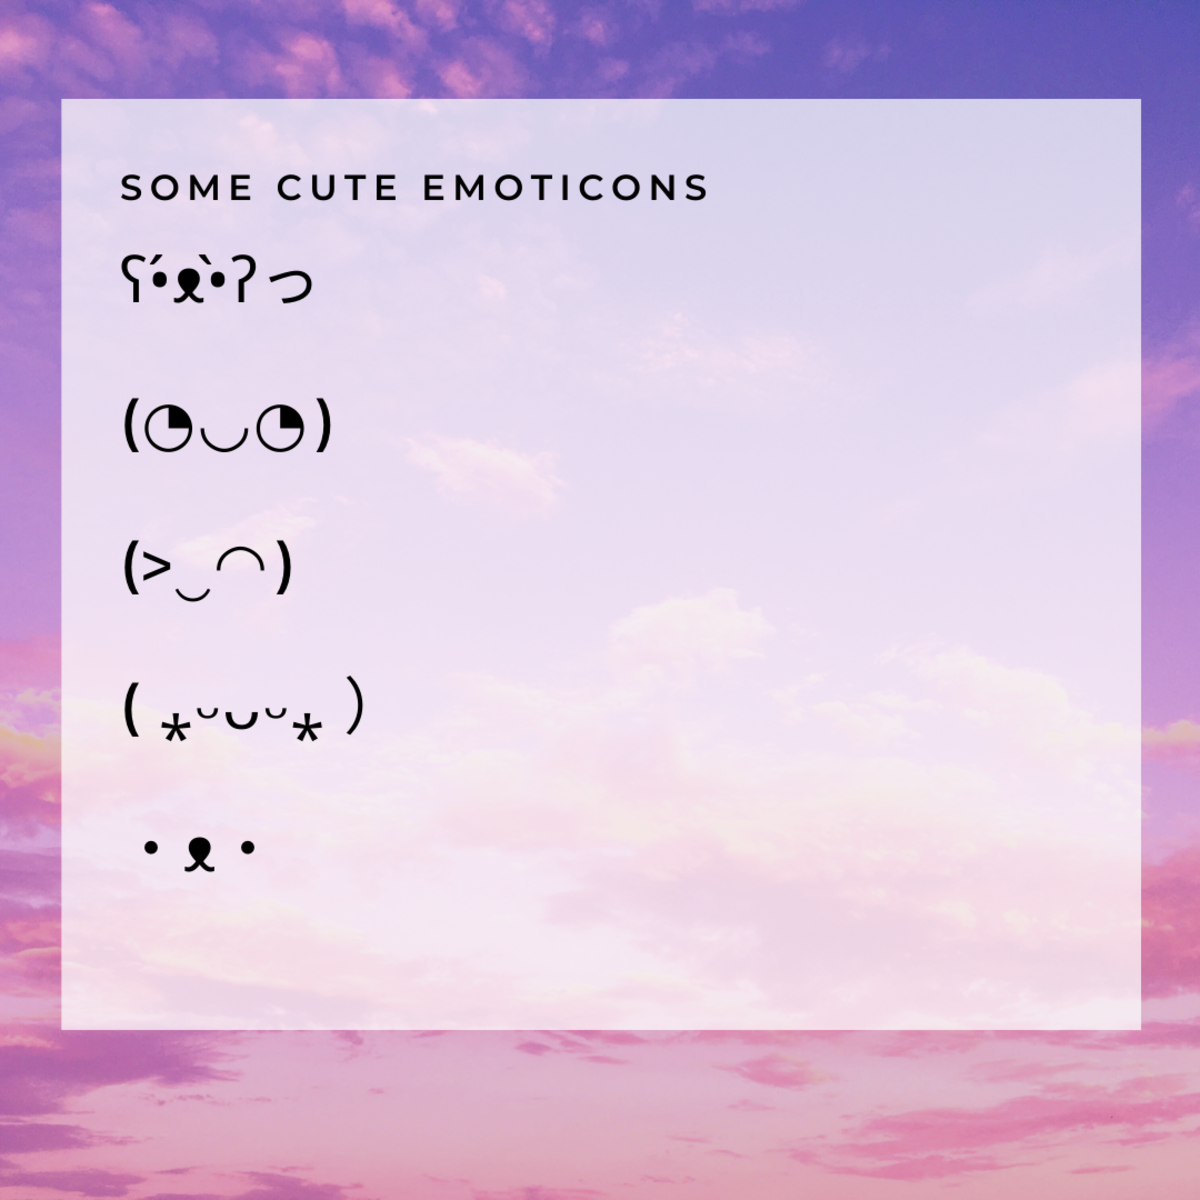 Here are some cute emoticons to help inspire you!